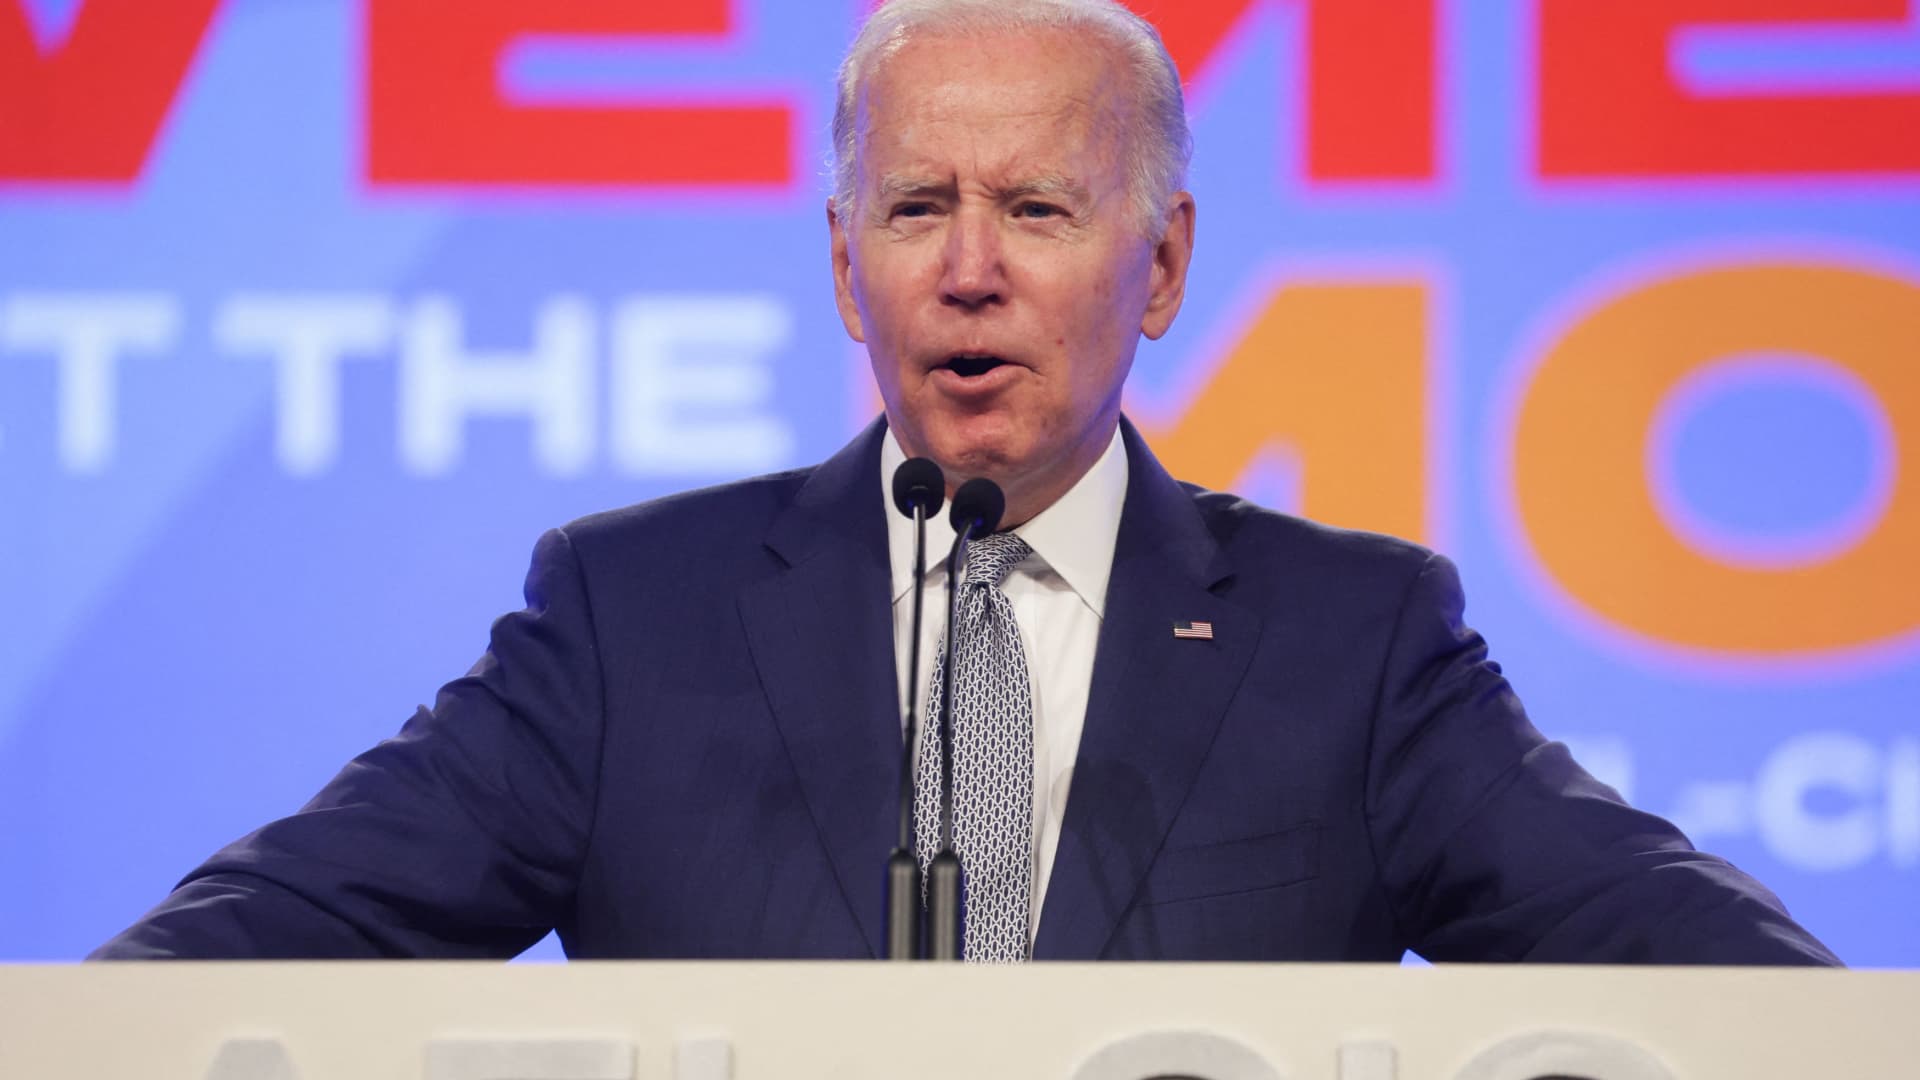 Biden tells oil companies in letter ‘well above normal’ refinery profit margins are ‘not acceptable’